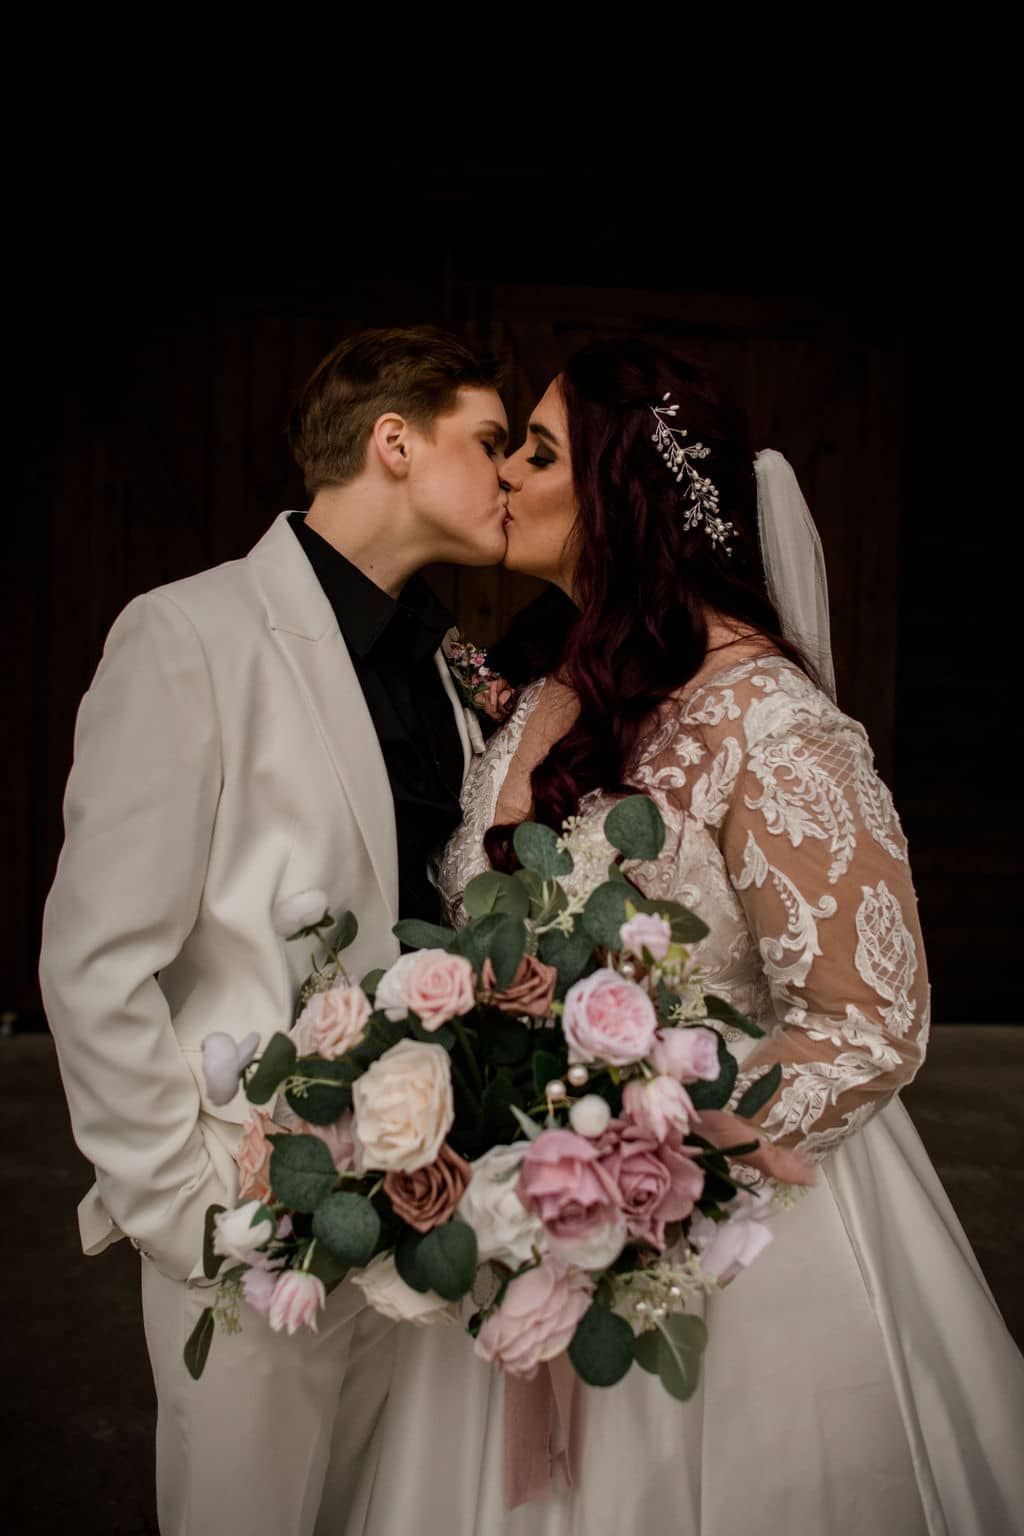 the two texas brides share a kiss before their wedding both dressed in white